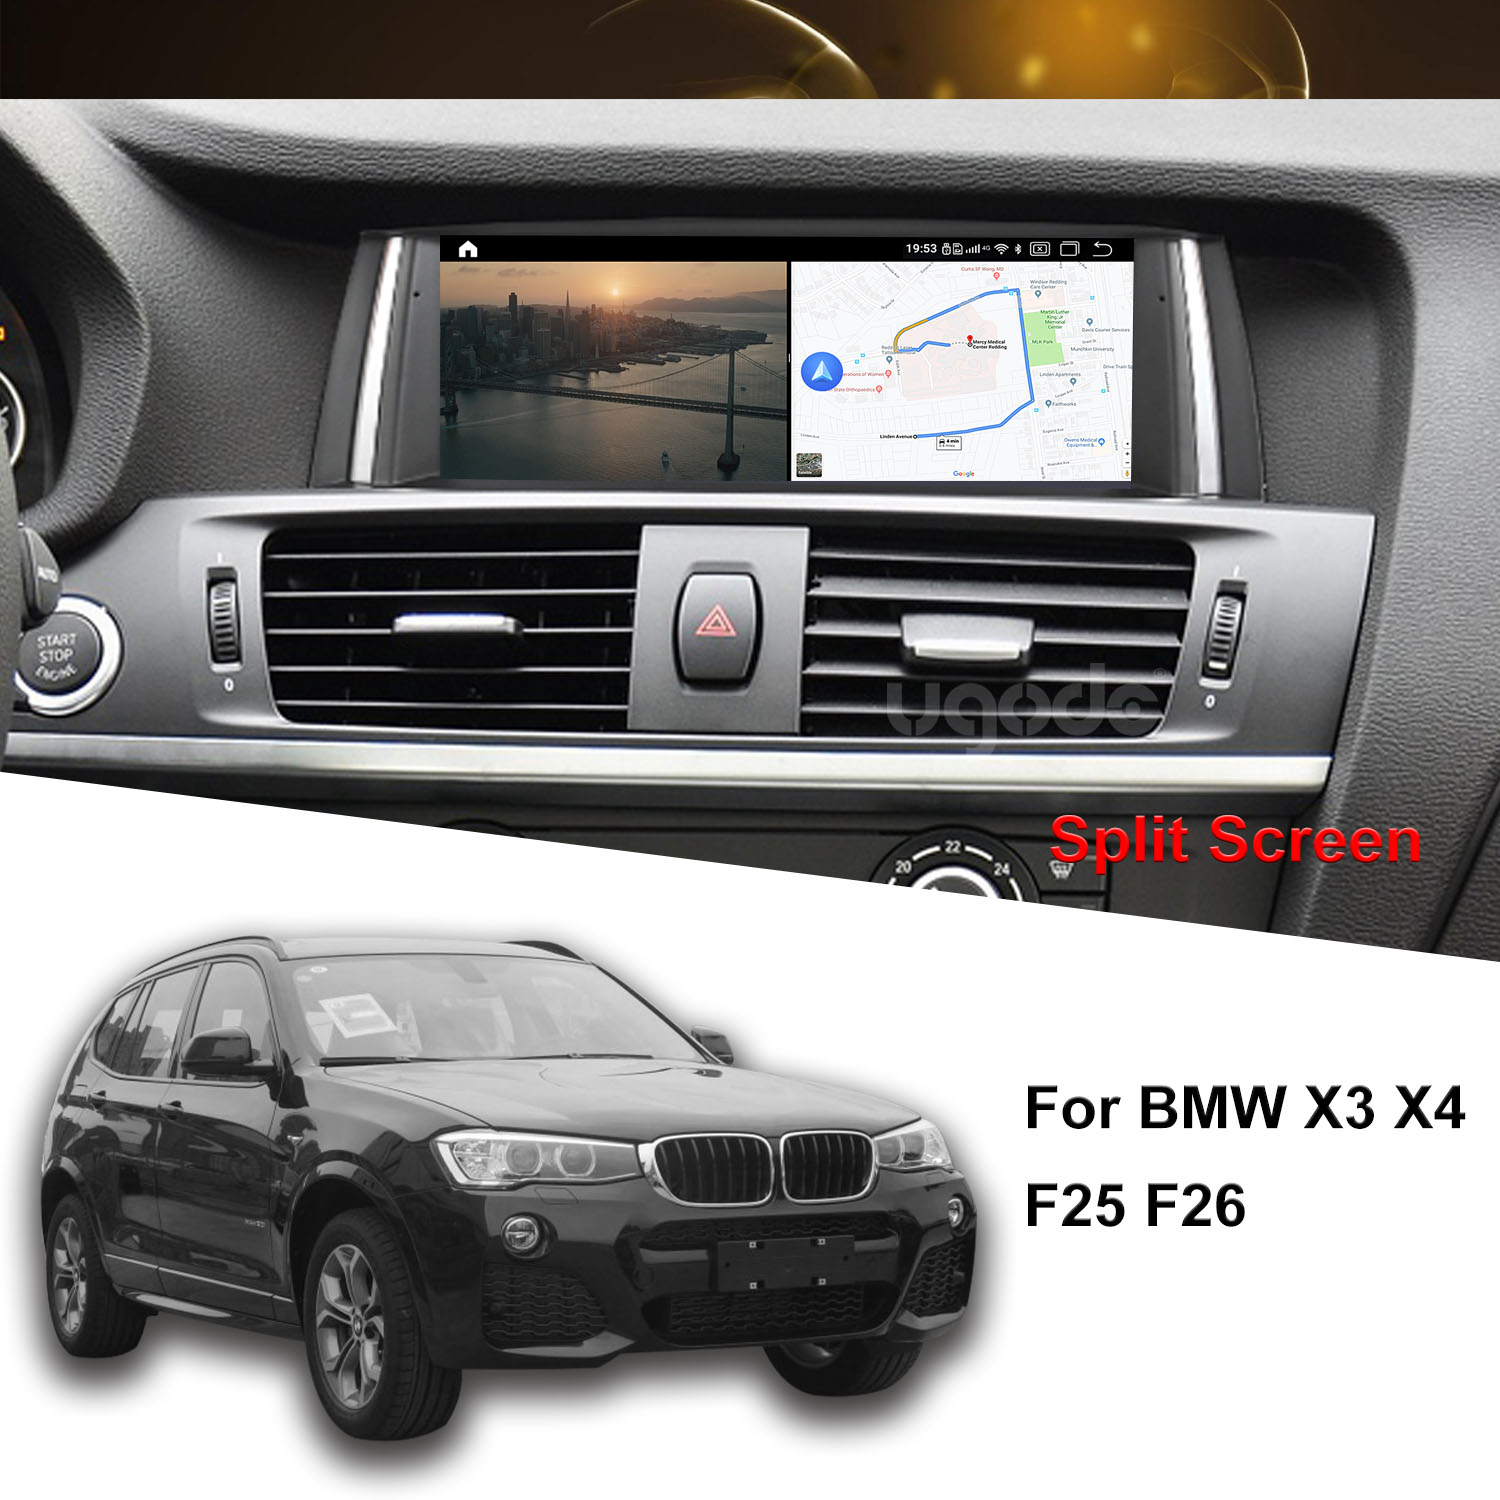 China For BMW X3 F25 X4 F26 Android Screen Upgrade Stereo CarPlay  Multimedia Player Manufacturer and Supplier